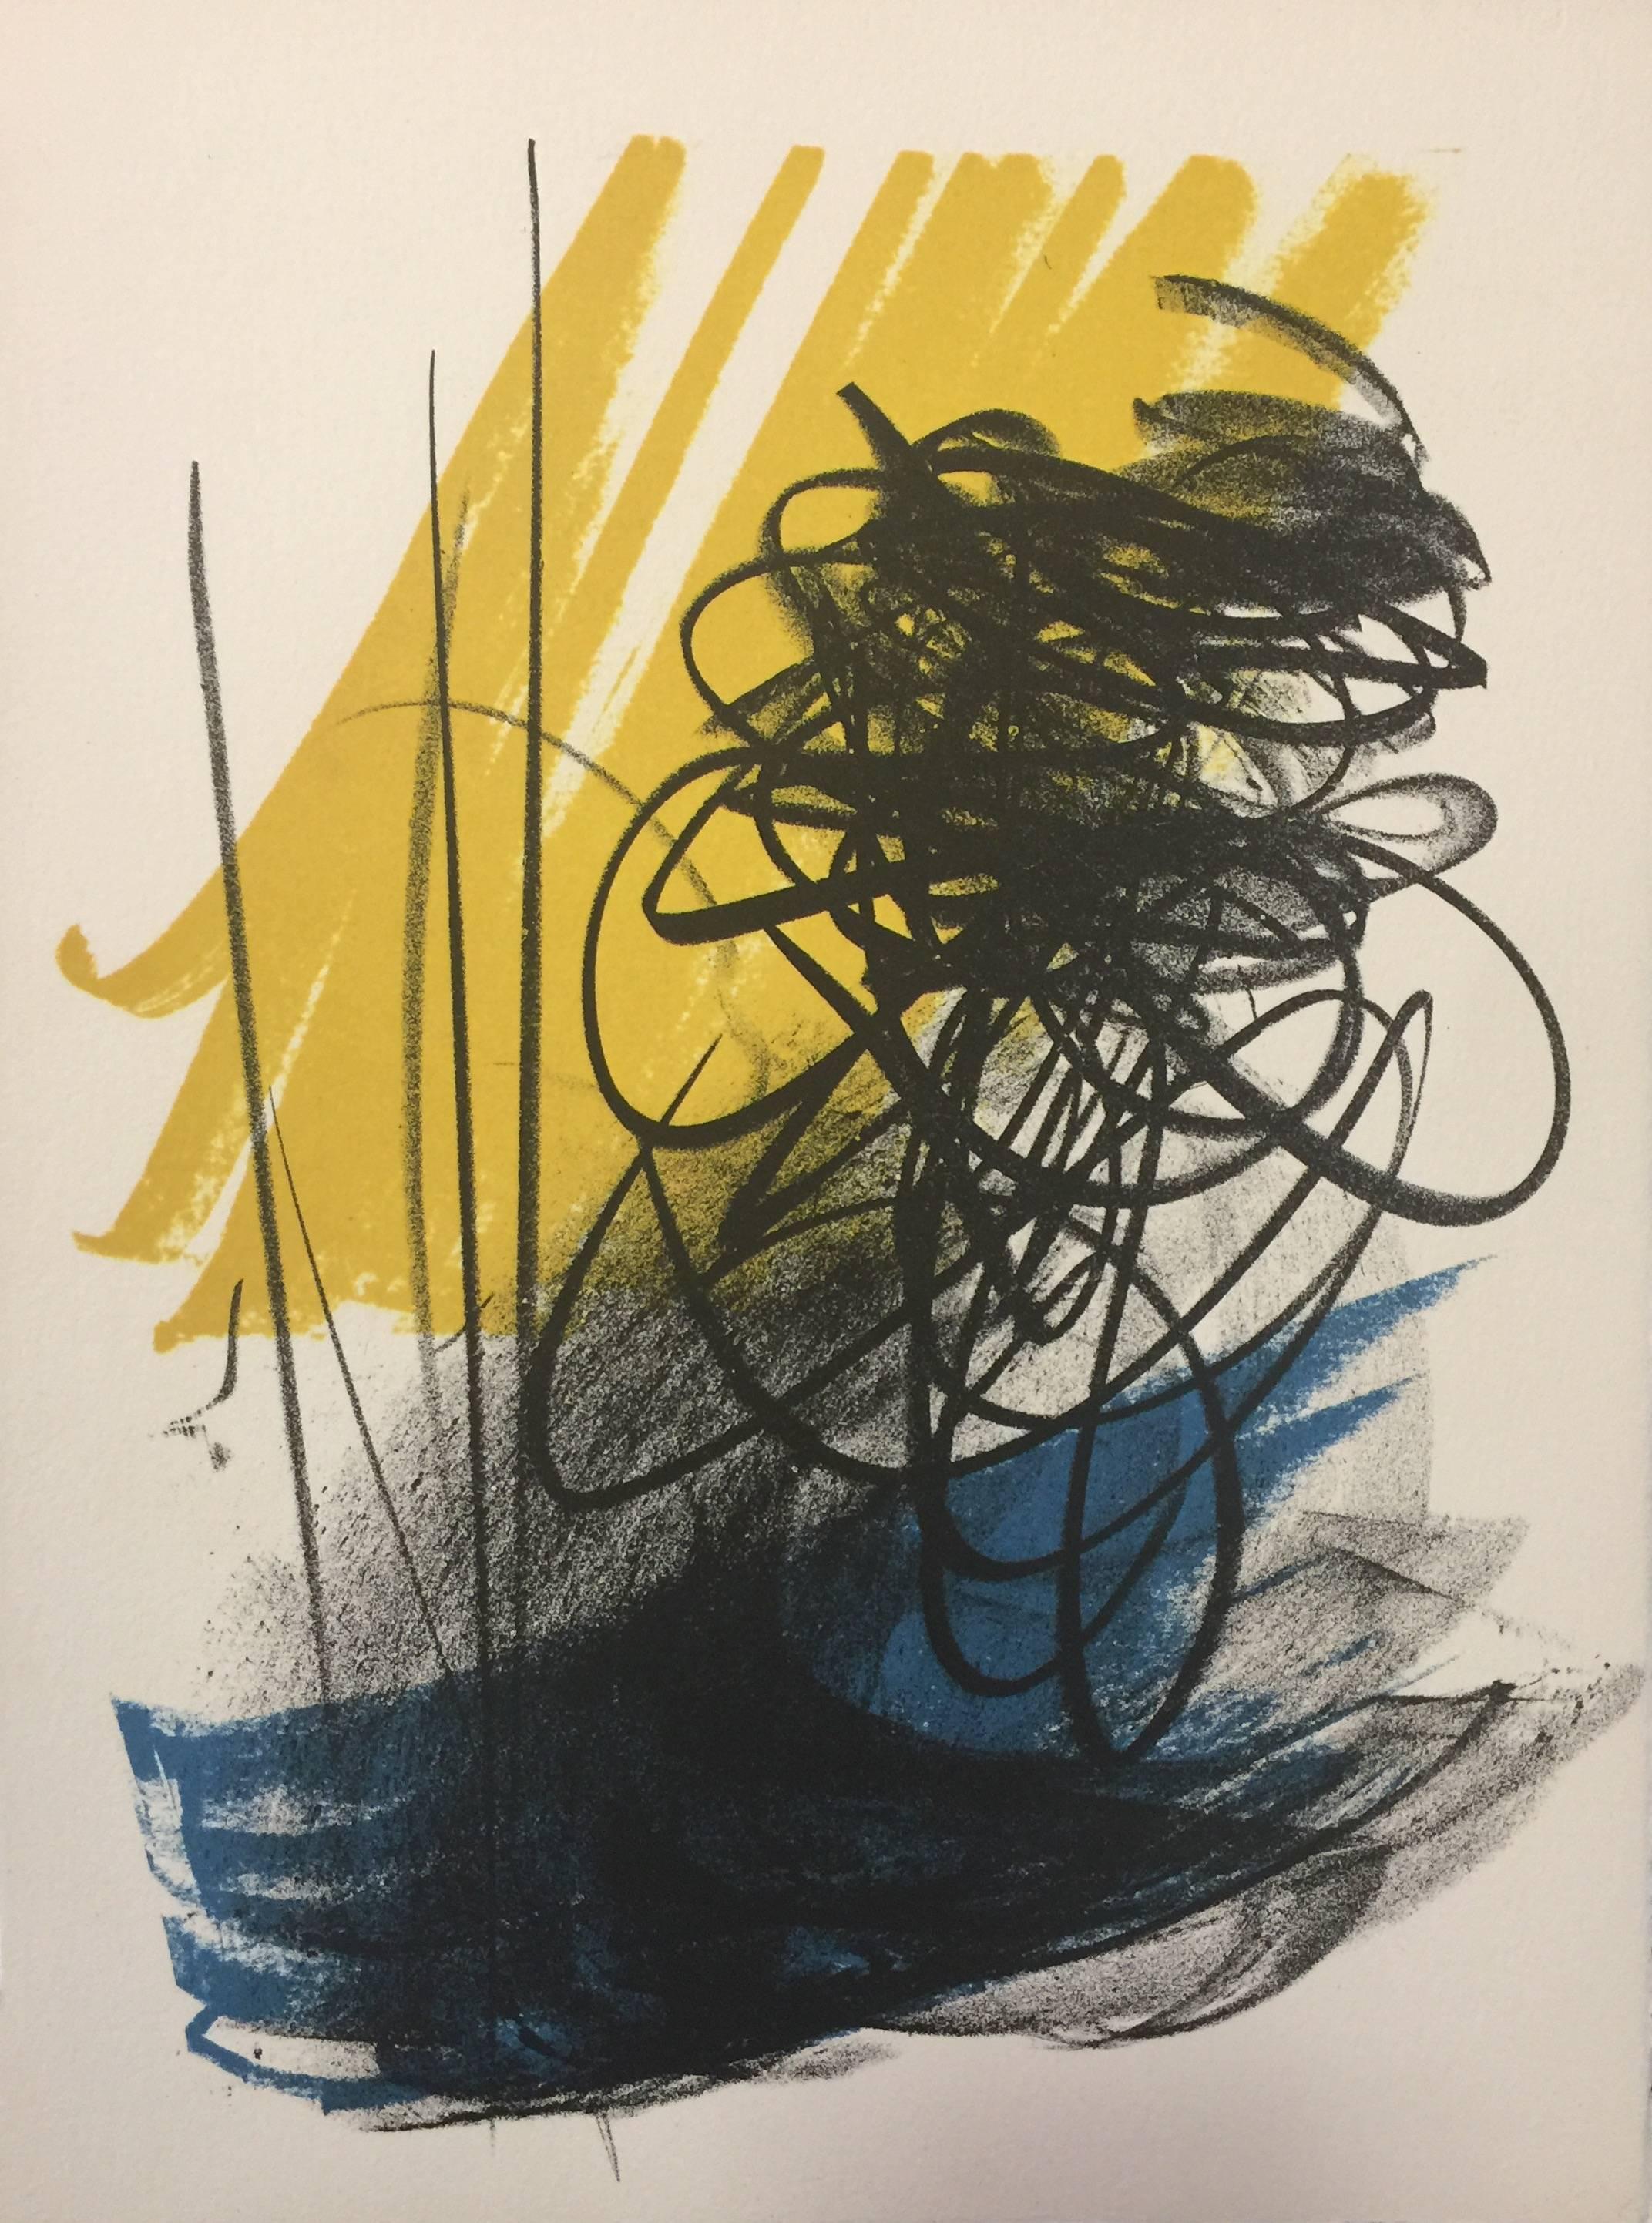 Abstract Composition - Signs on Yellow - Original Lithograph by Hans Hartung